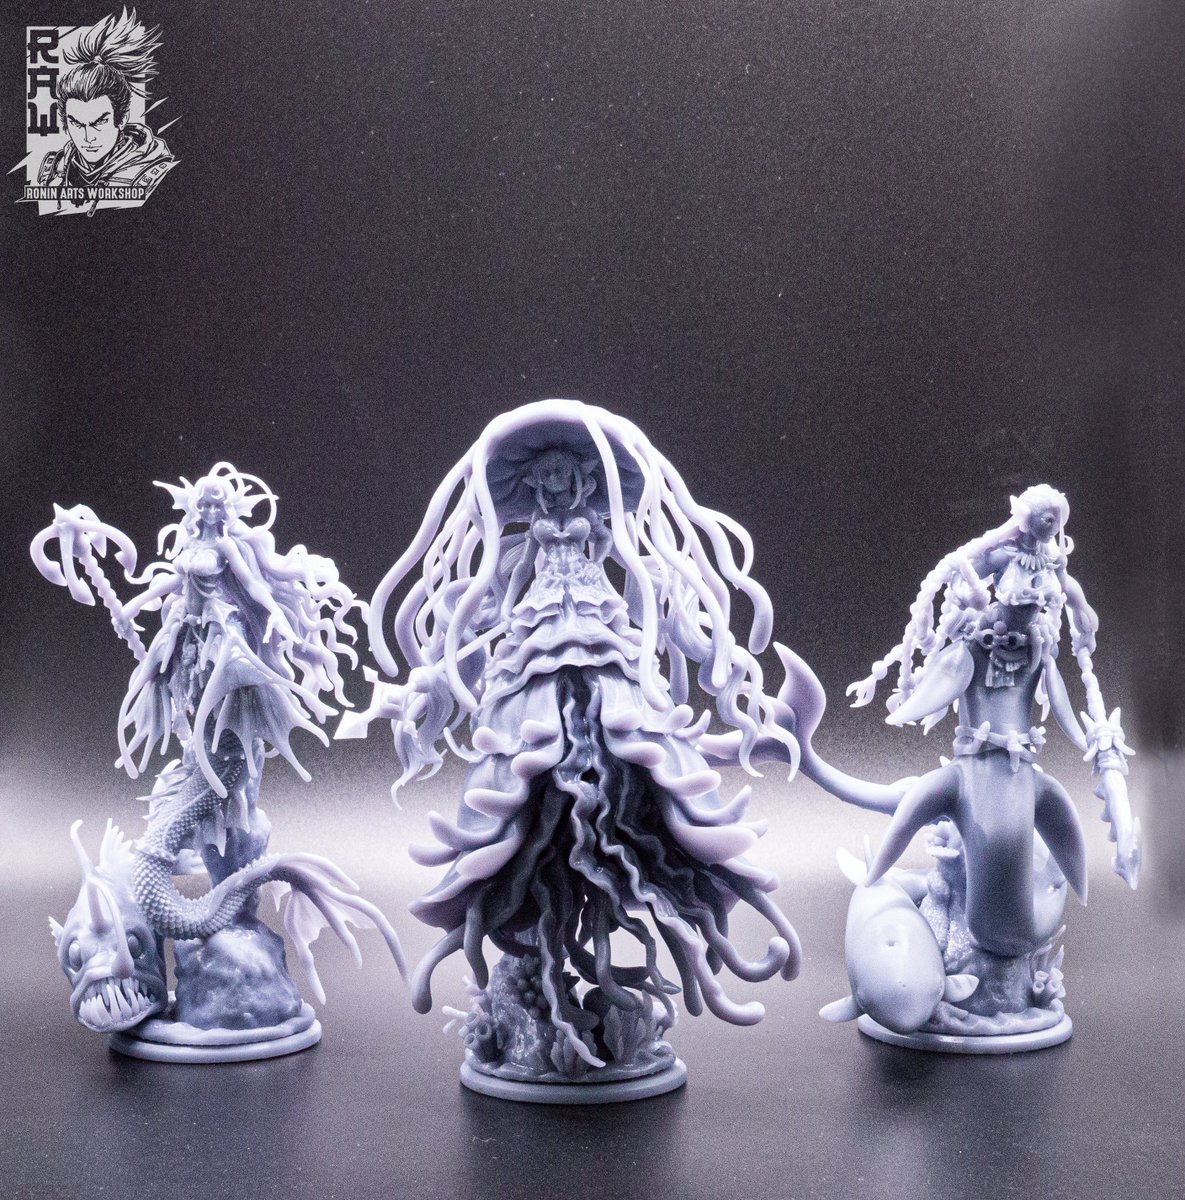 Minun, Dahana and Lyda printed by us in their true mermaid form!
It's our second year of #Mermay and we are having a blast!

#3dprinting #warmongers #3dprint #フィギュア #DnD #TRPG #mermay2024